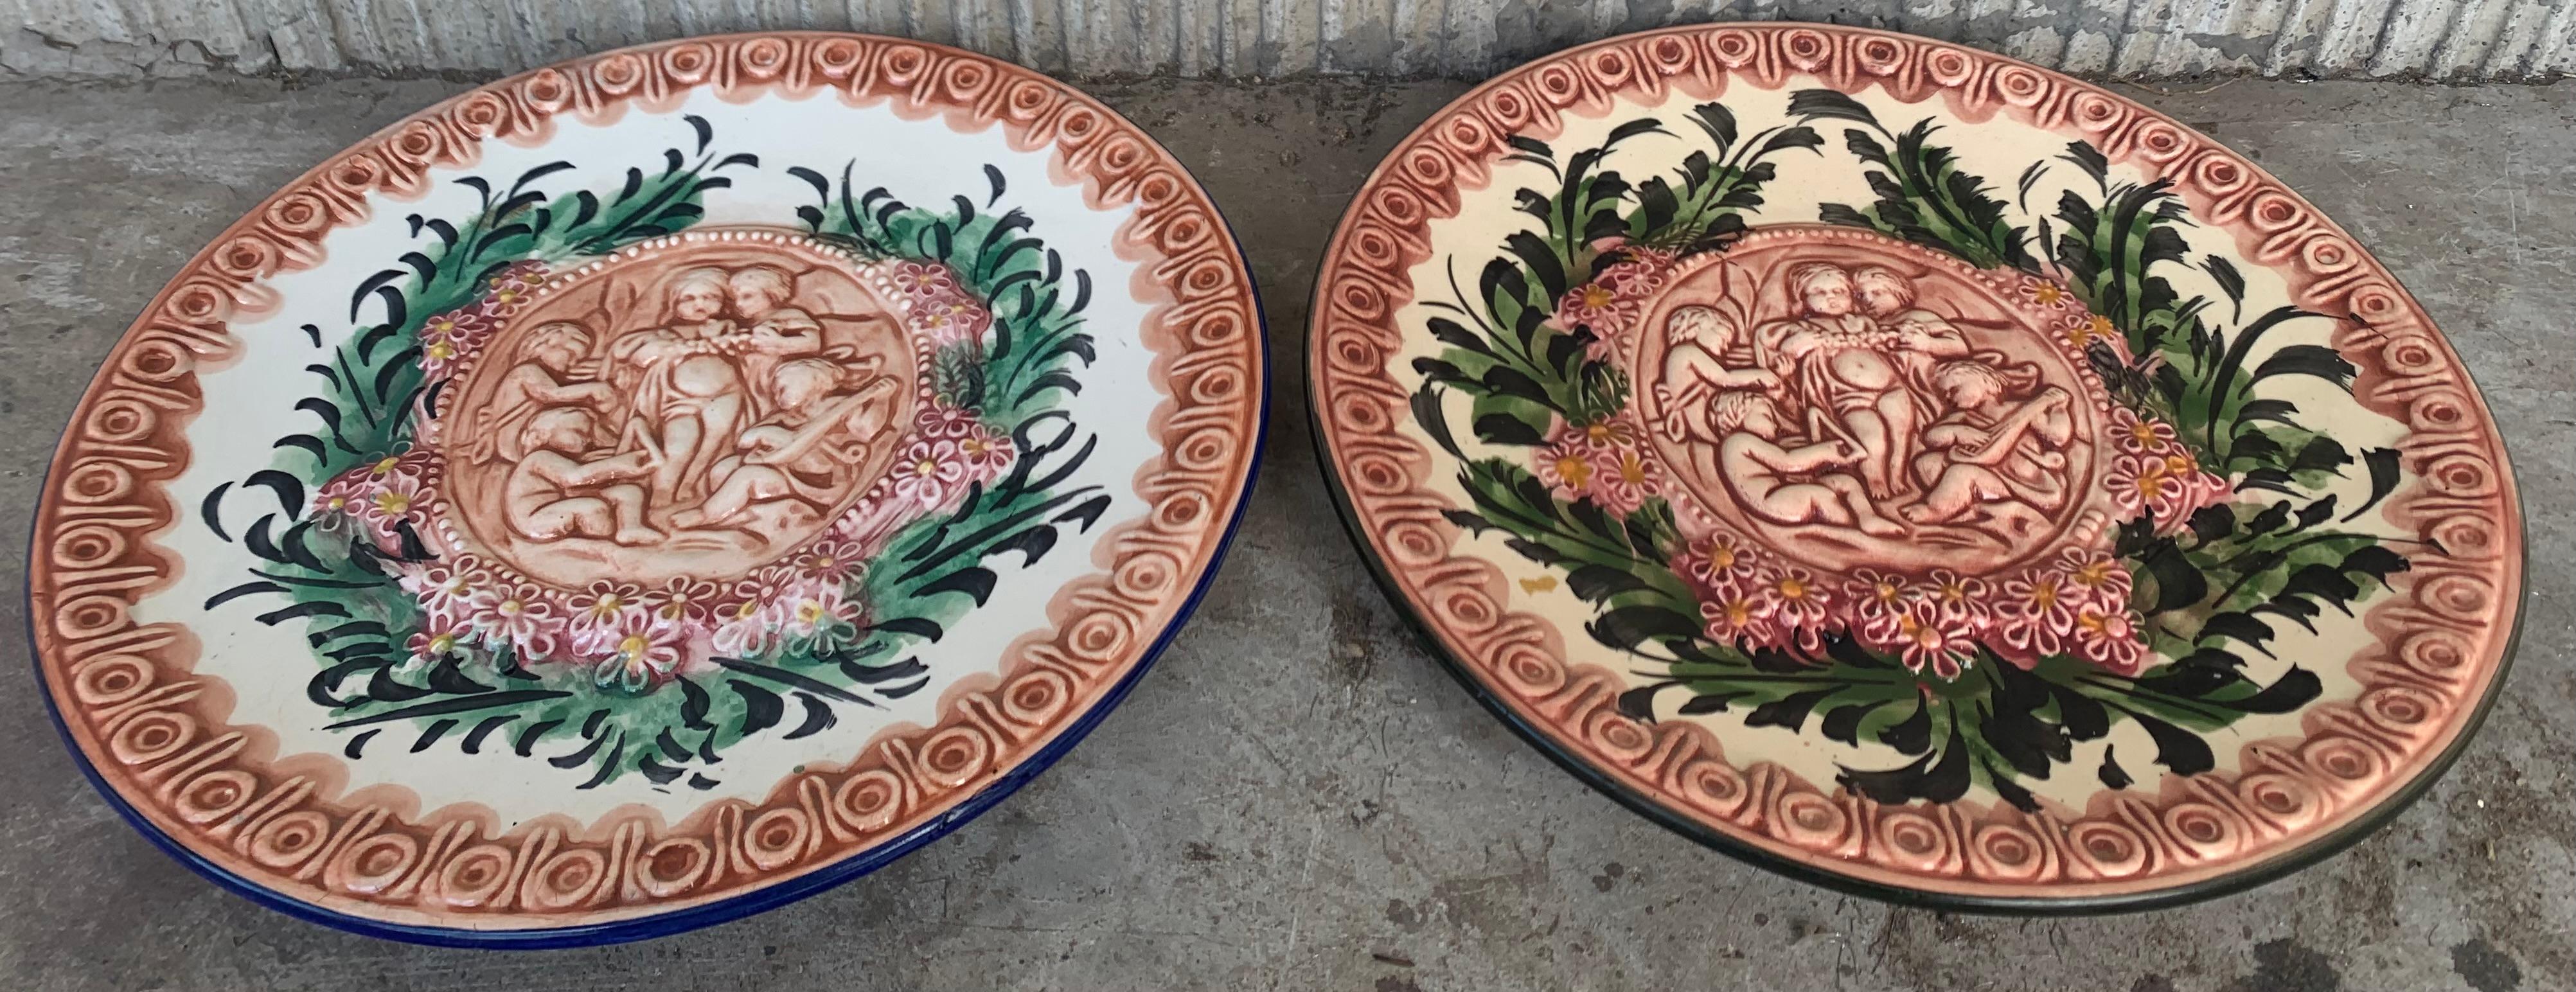 Lovely antique circular decorative porcelain platers, a round relief centered by hand repoussé children figures playing, with flowers and superlative bas relief hand chased allegorical grottesques, scrolls and flowers on the round border.
 